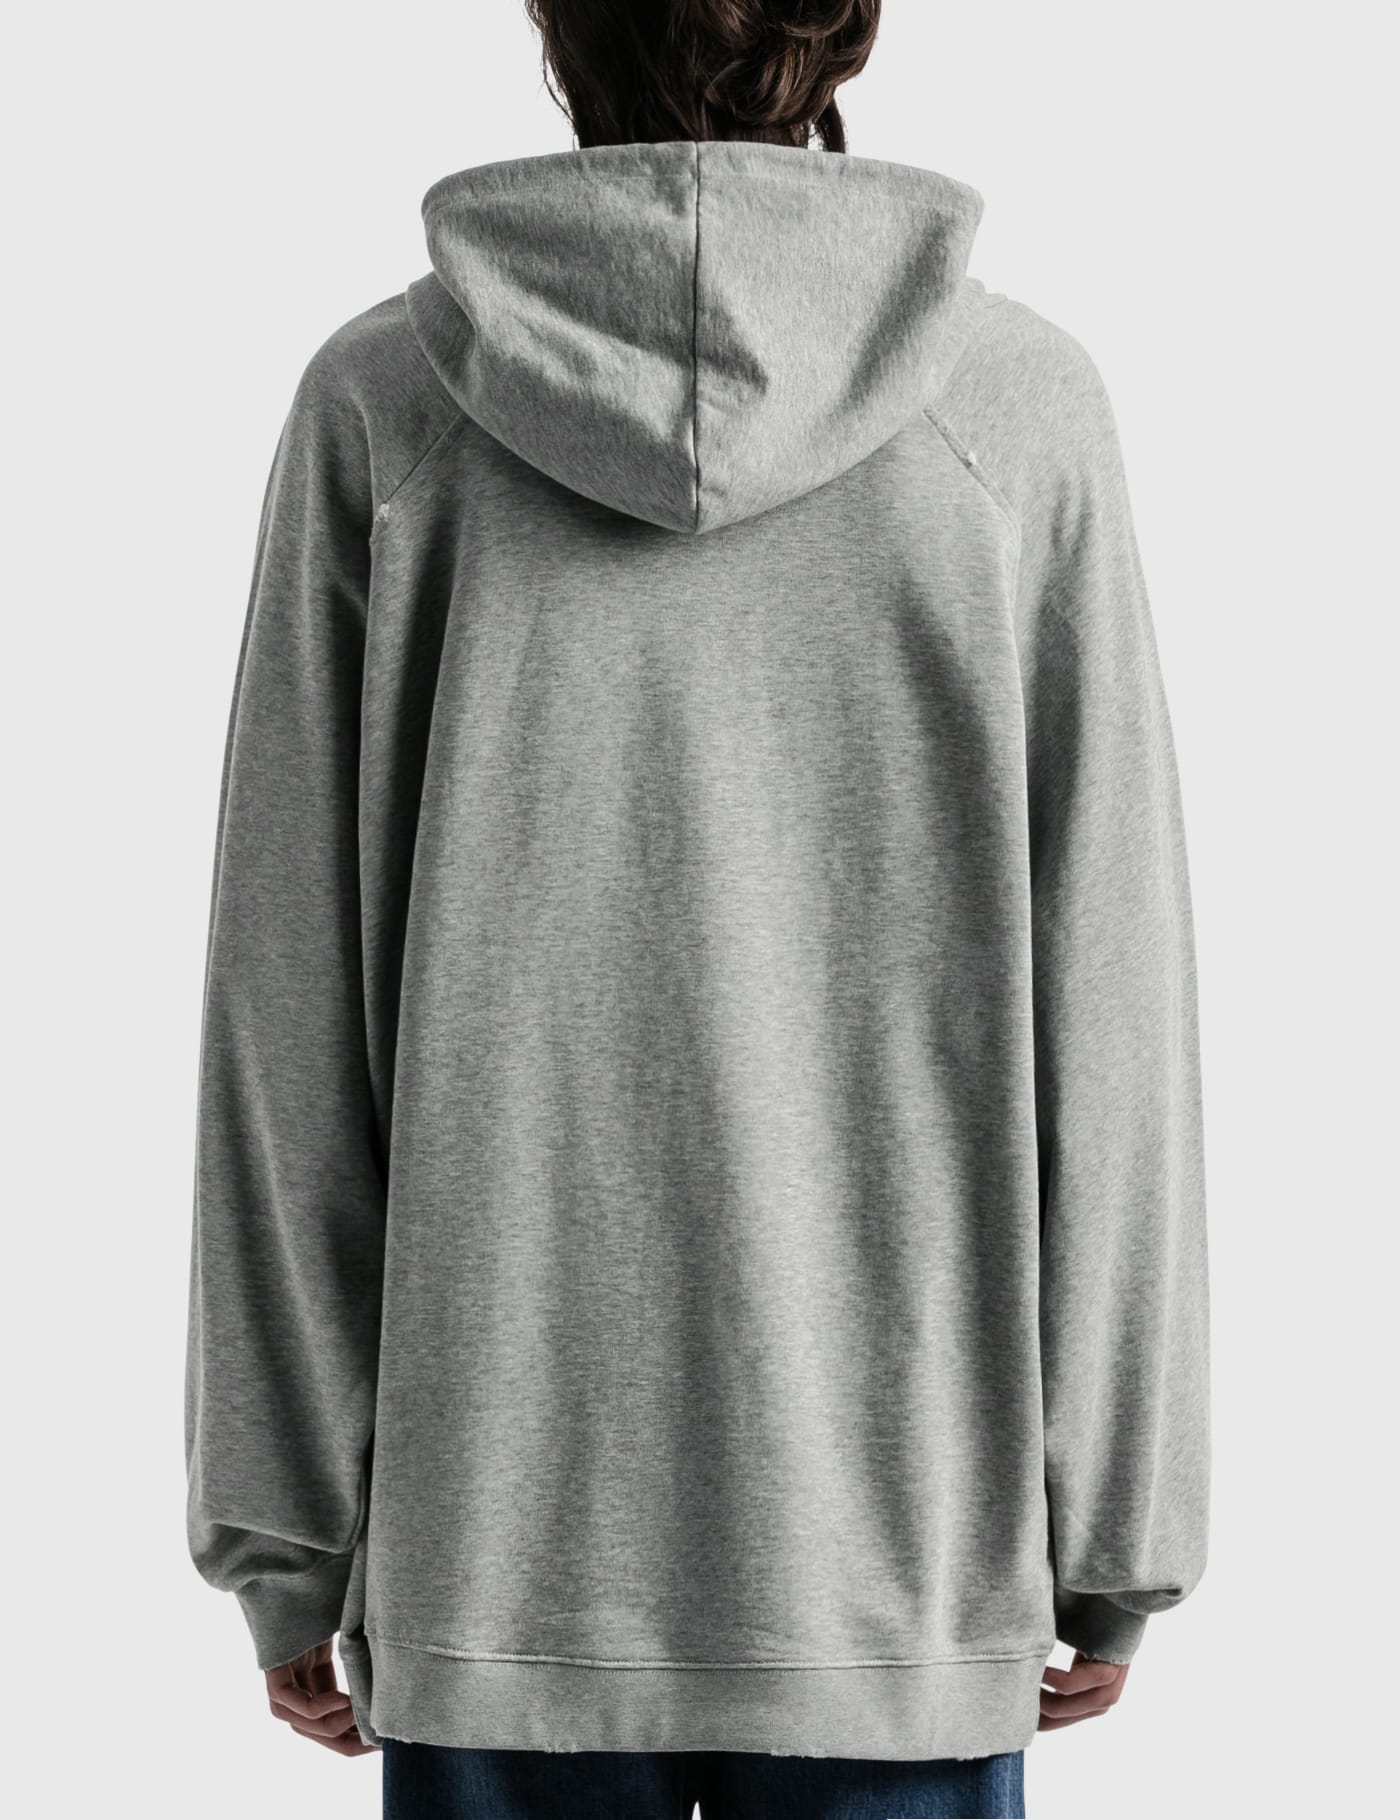 Raf Simons - Destroyed Welcome Home Hoodie | HBX - Globally Curated Fashion  and Lifestyle by Hypebeast